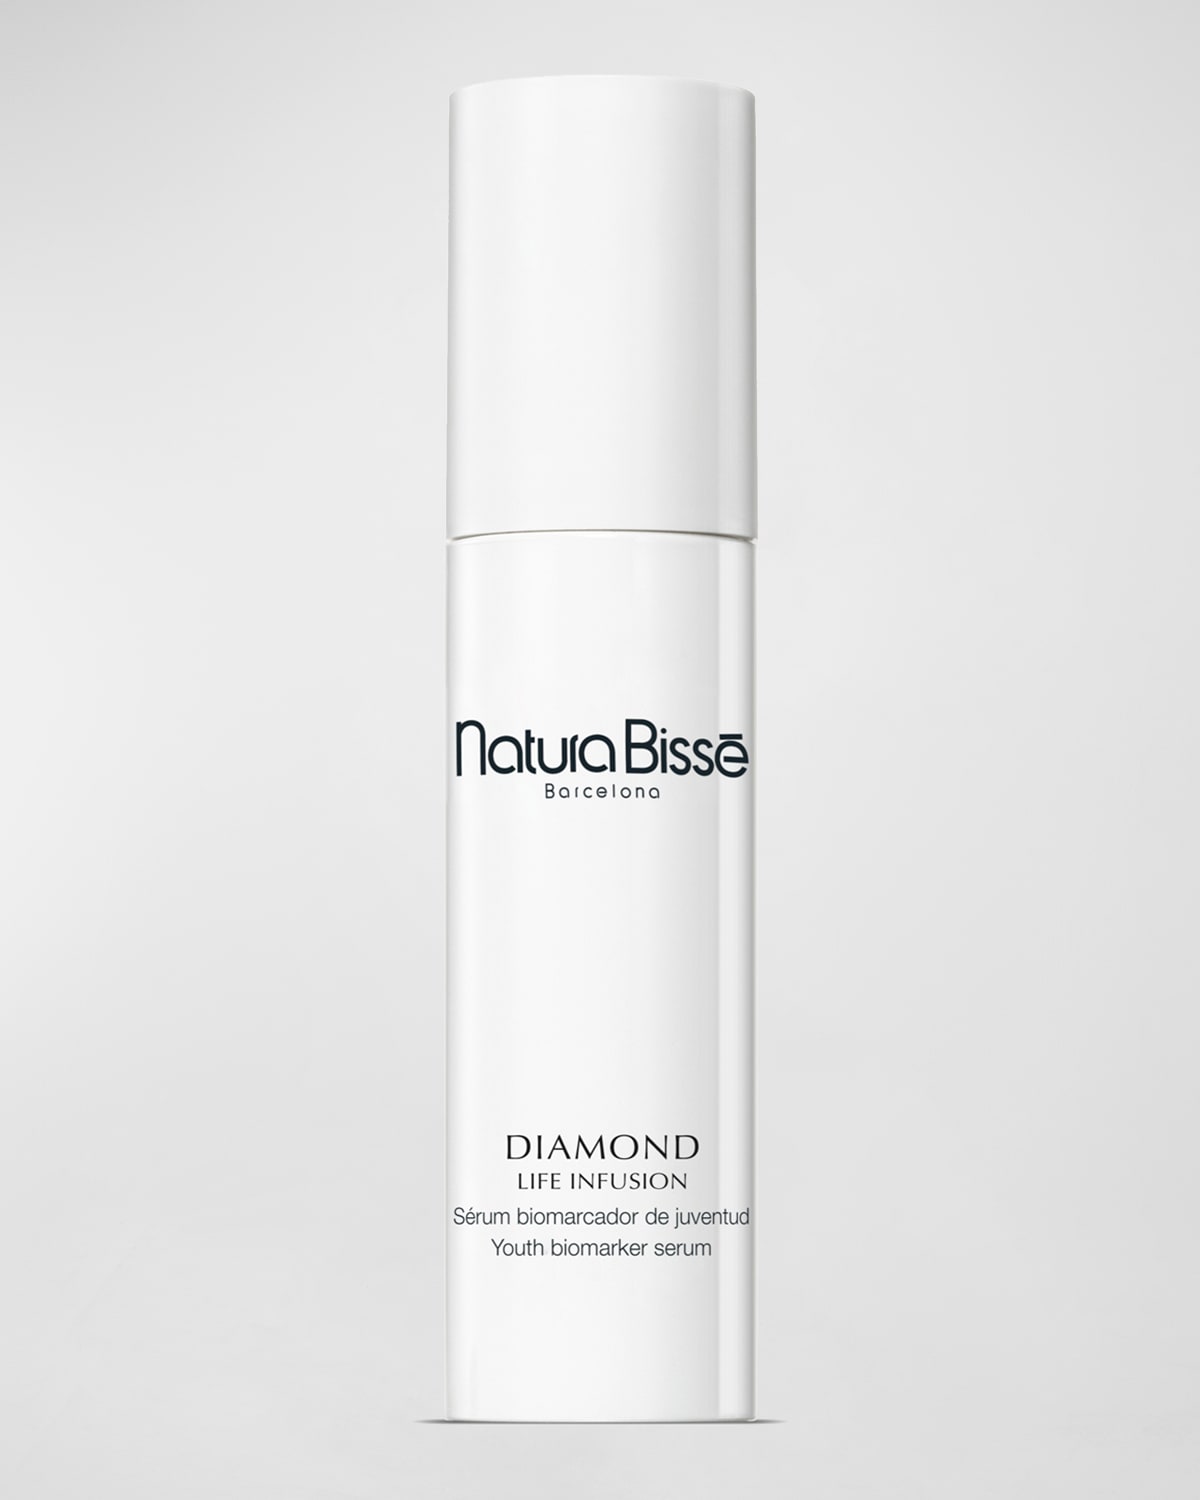 1.7 oz. Limited Edition Value Size Diamond Life Infusion ($1,250 Value)